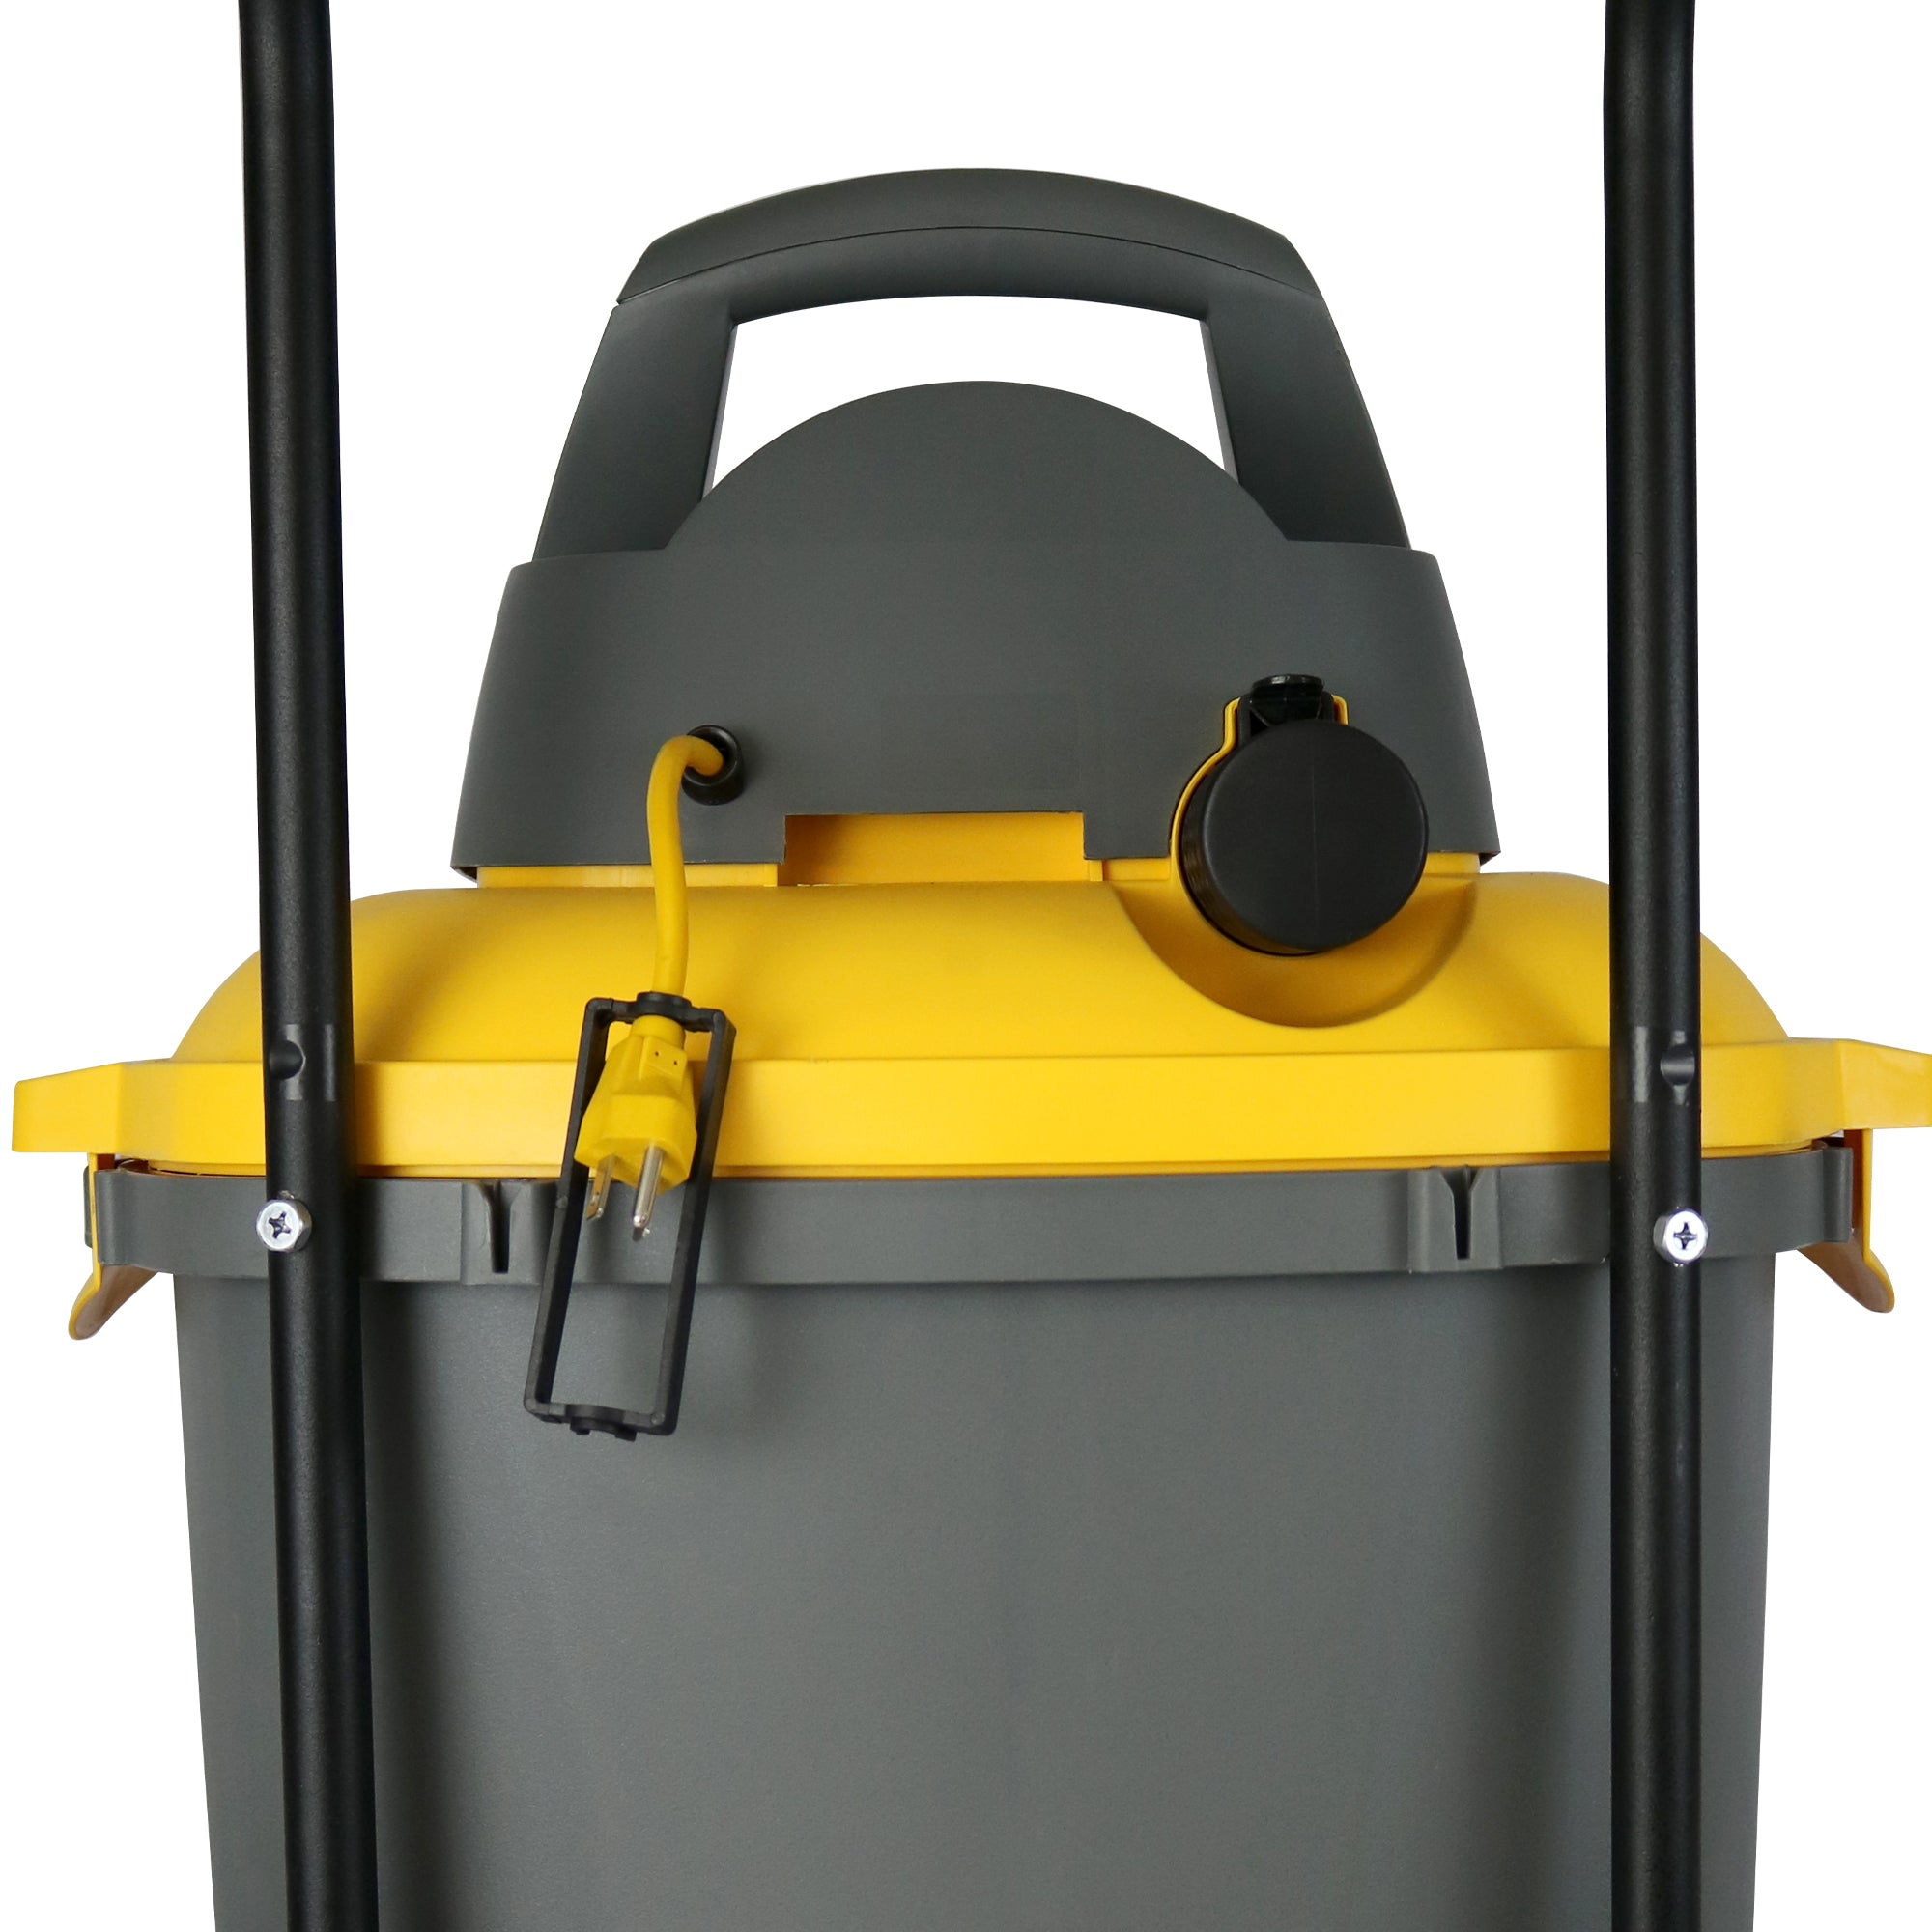 Contractor 16 Gallon 6.5 PHP Wet Dry Shop Vacuum with Handle WD-16 C4H